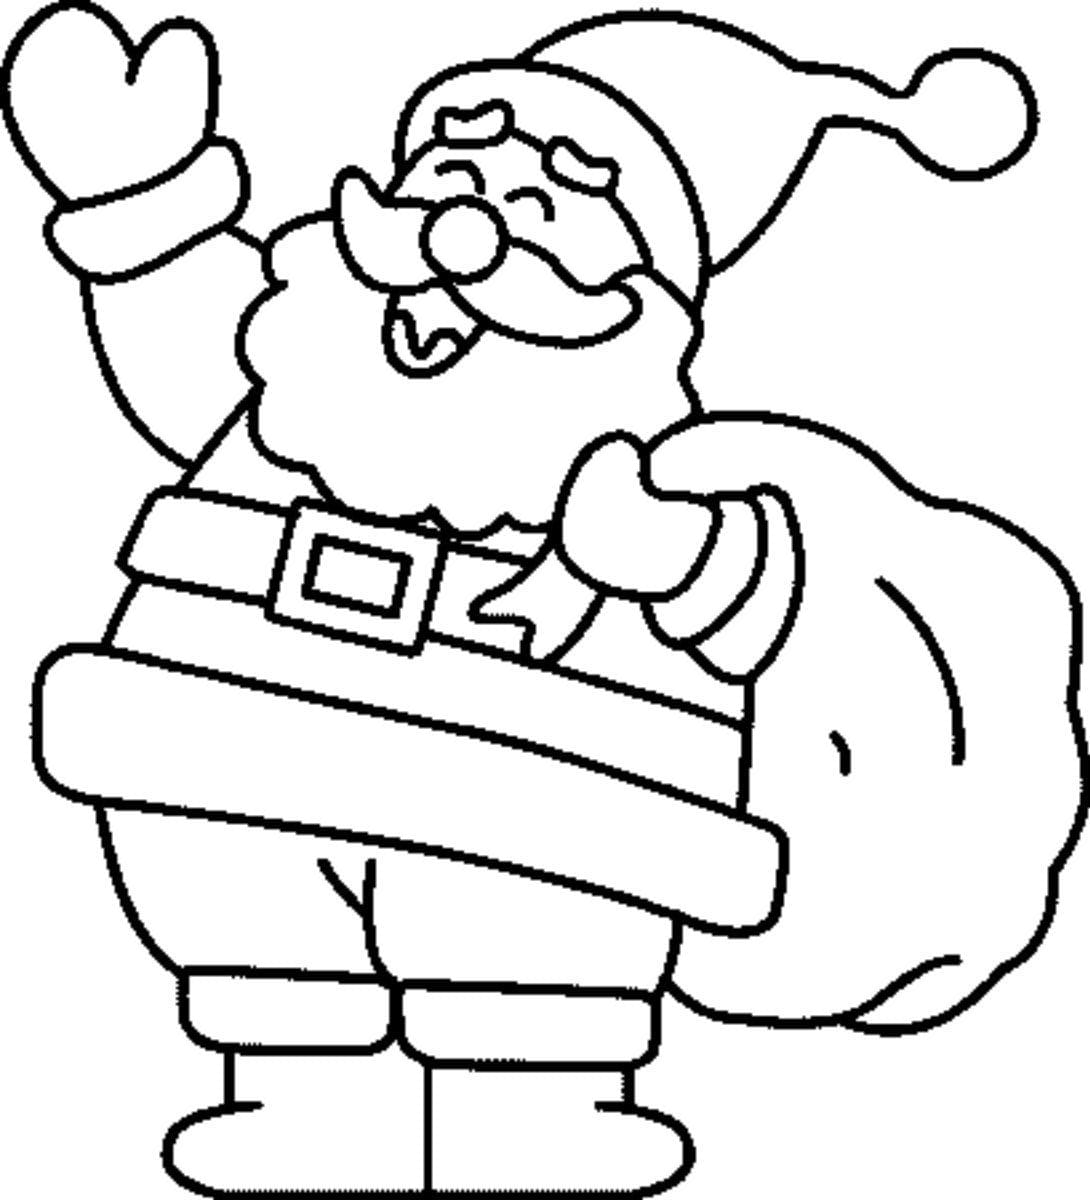 Santa Claus With A Bag Of Gifts Coloring Page